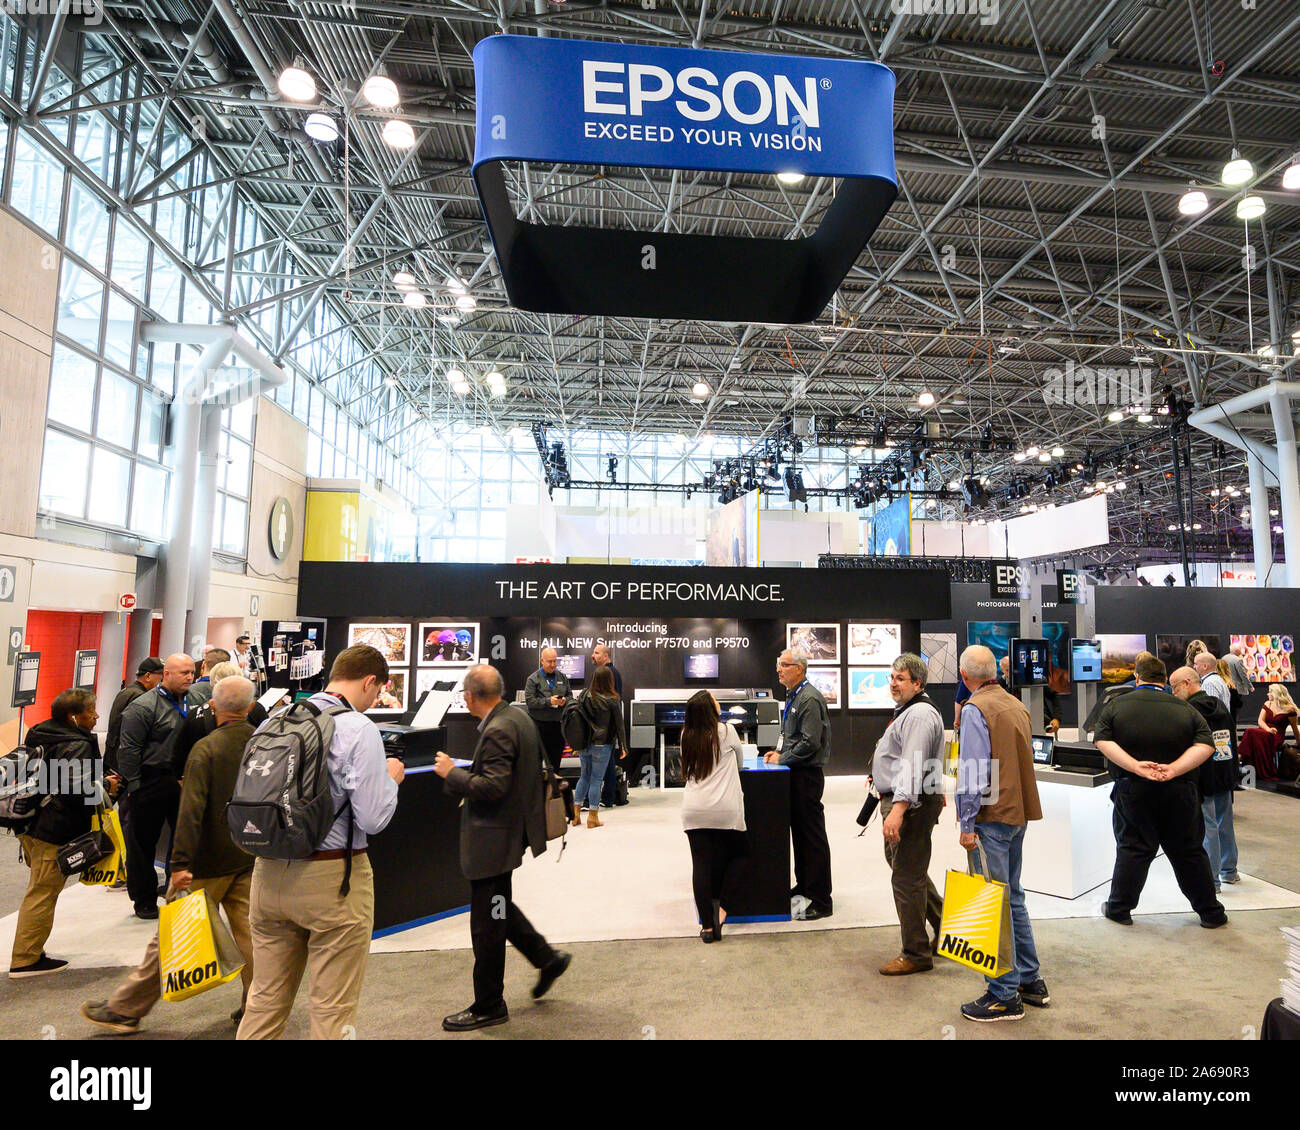 The Epson booth seen during the PhotoPlus Expo conference held at the Jacob K. Javits Convention Center in New York. Stock Photo